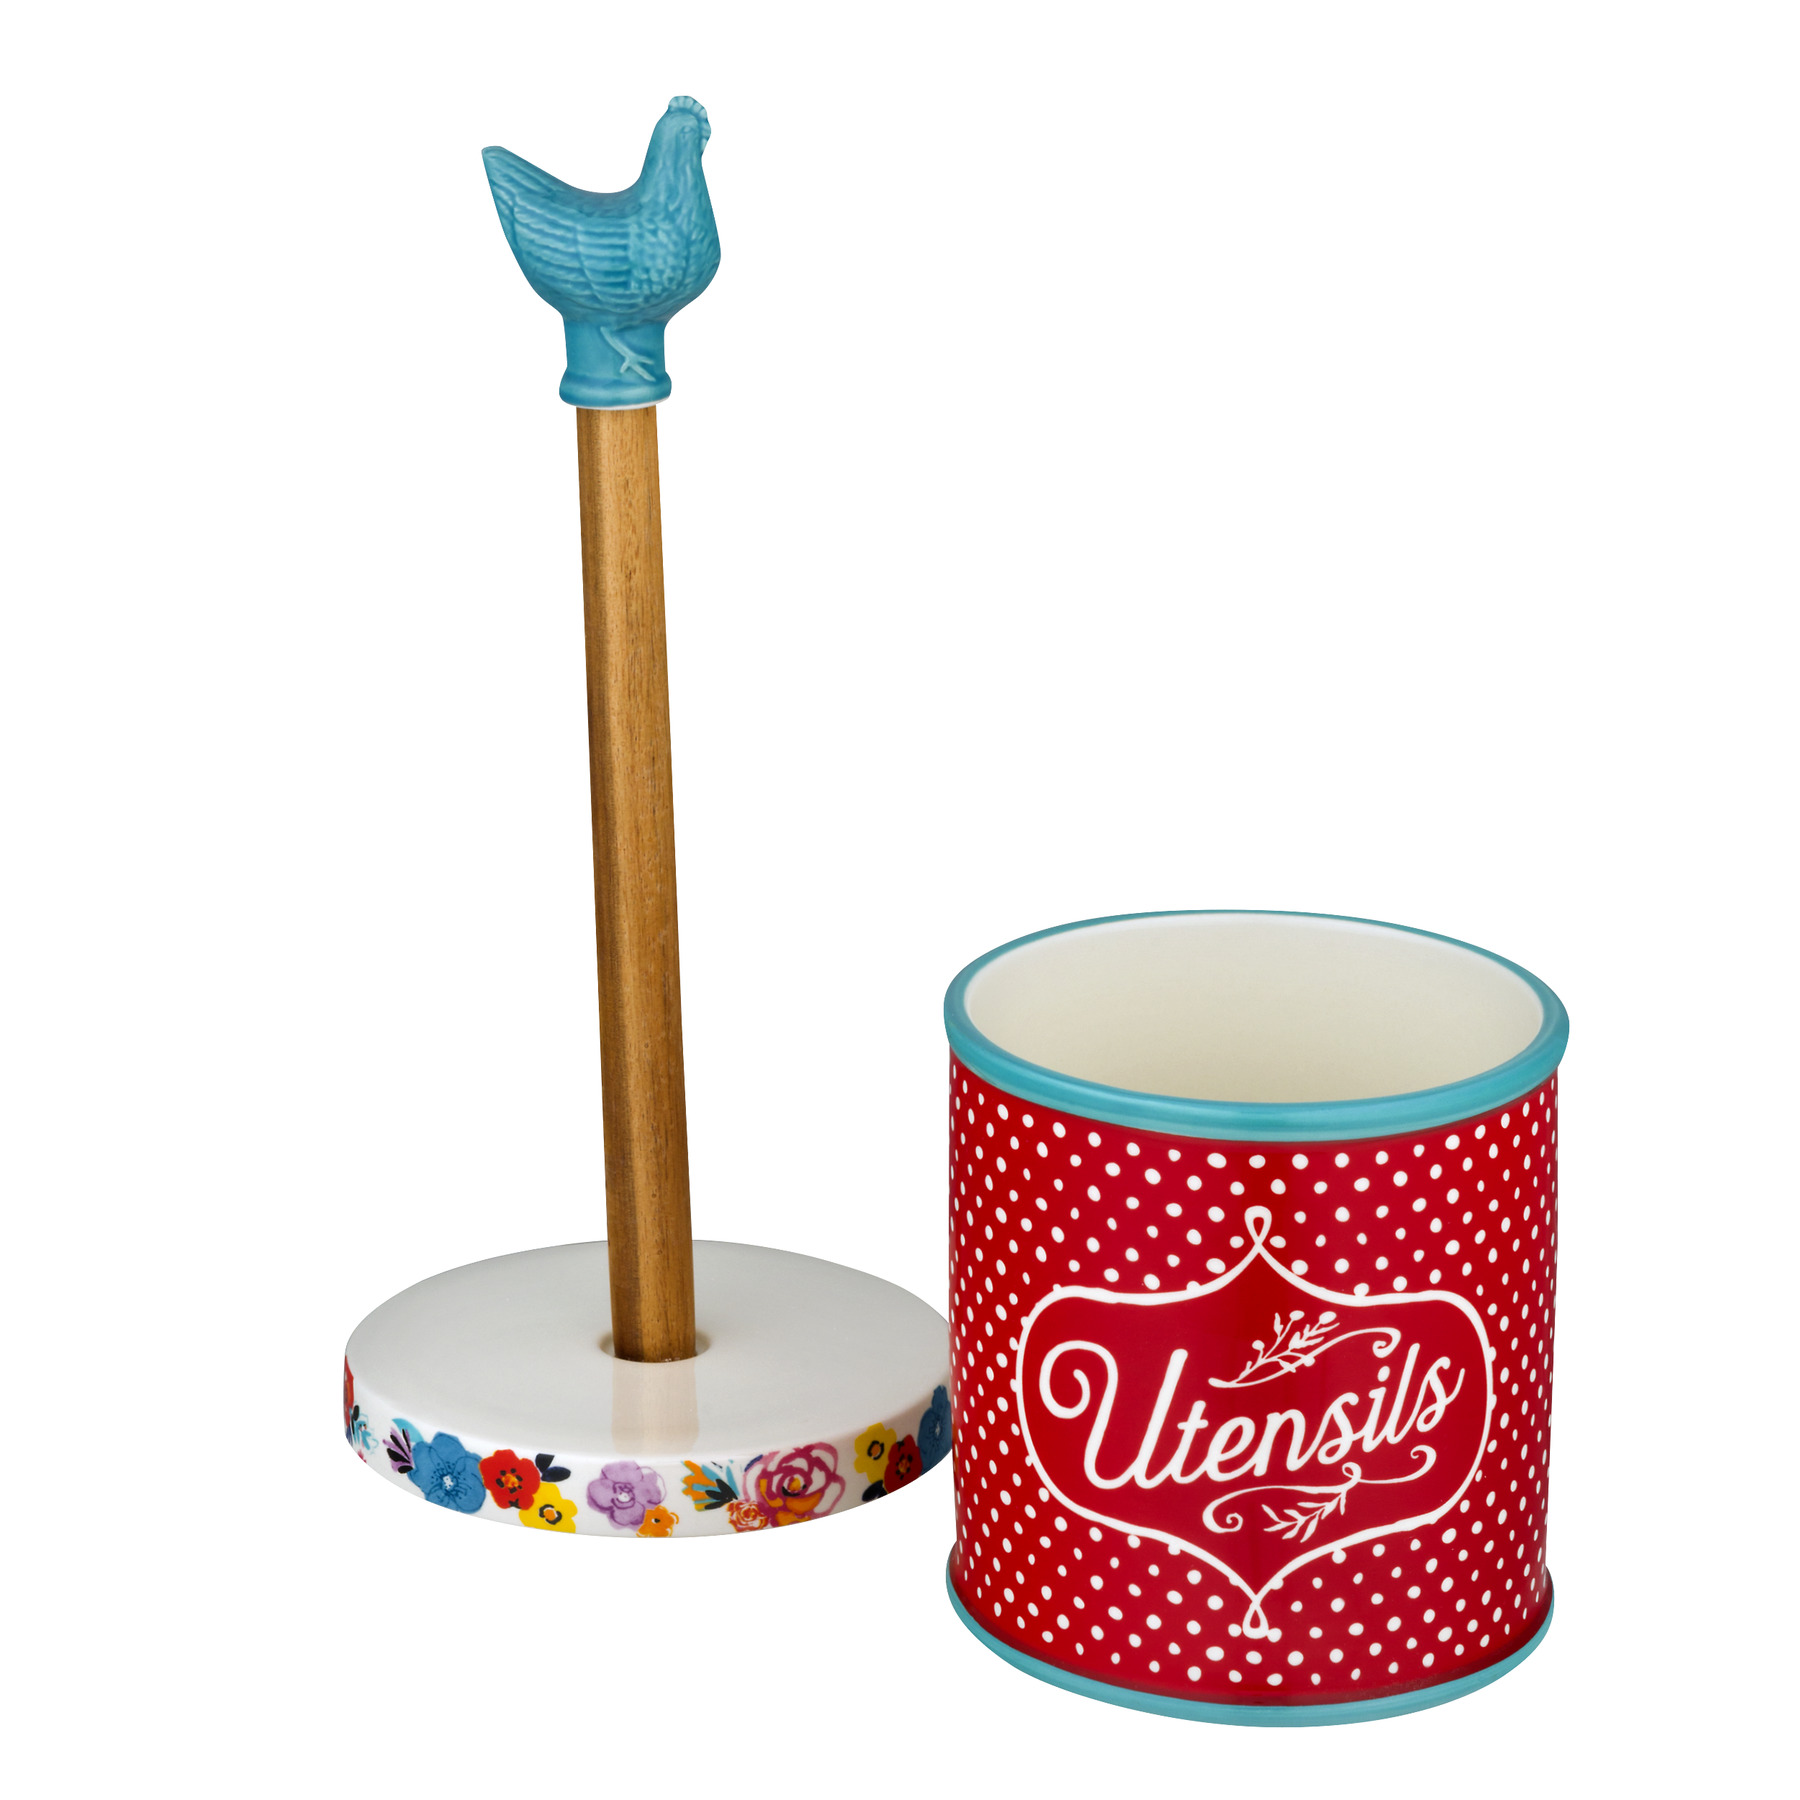 The Pioneer Woman Flea Market Paper Towel Holder and Utensil Crock, Turquoise - image 1 of 6